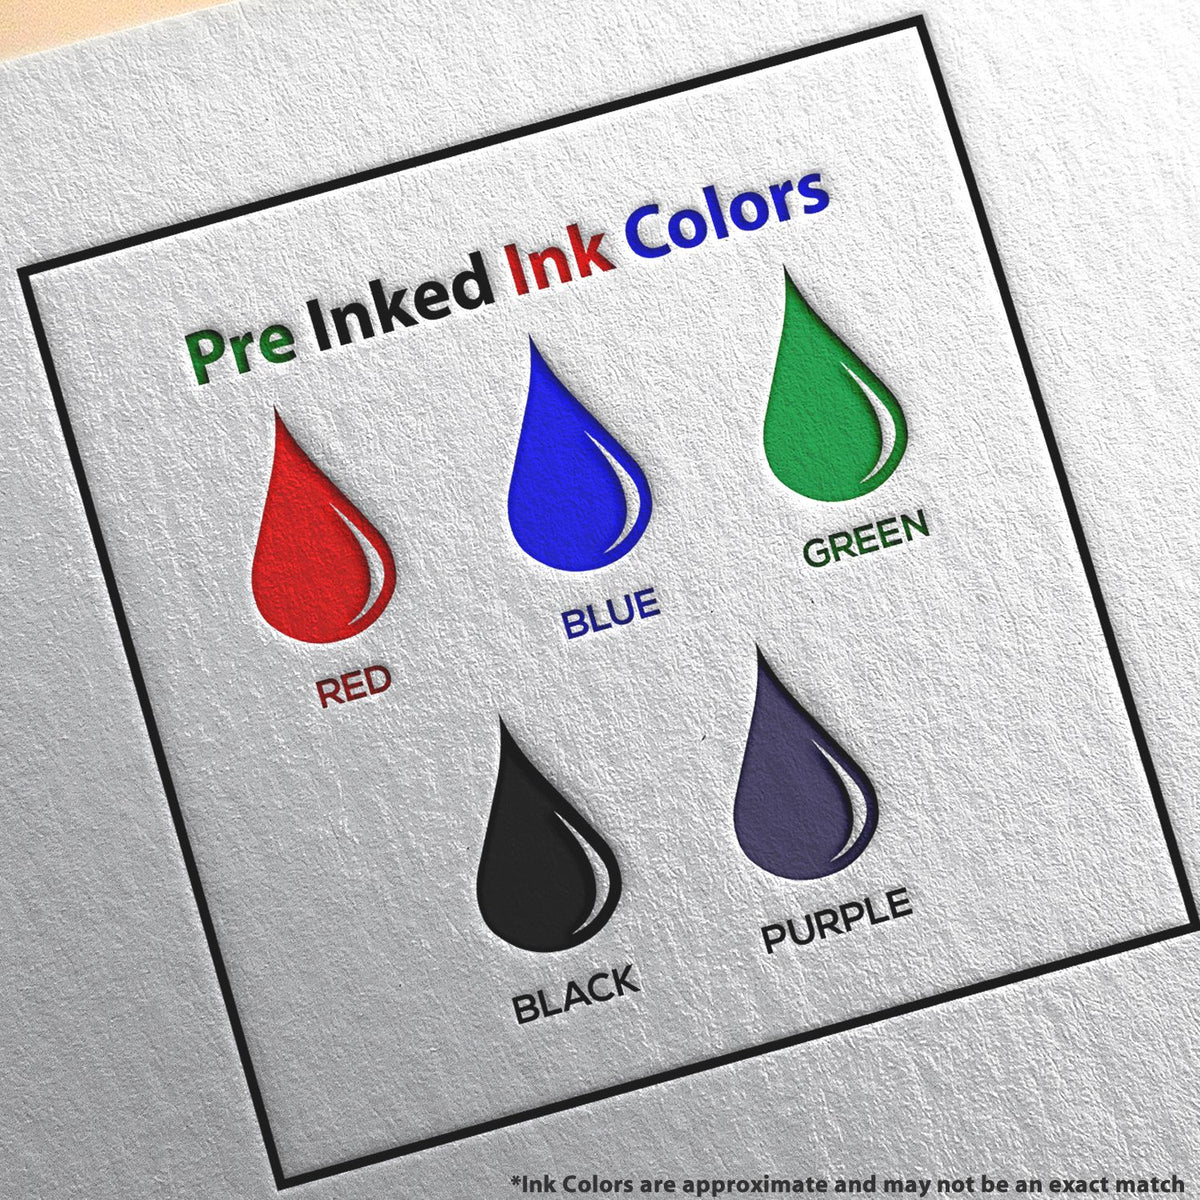 A picture showing the different ink colors or hues available for the Slim Pre-Inked Alabama Architect Seal Stamp product.